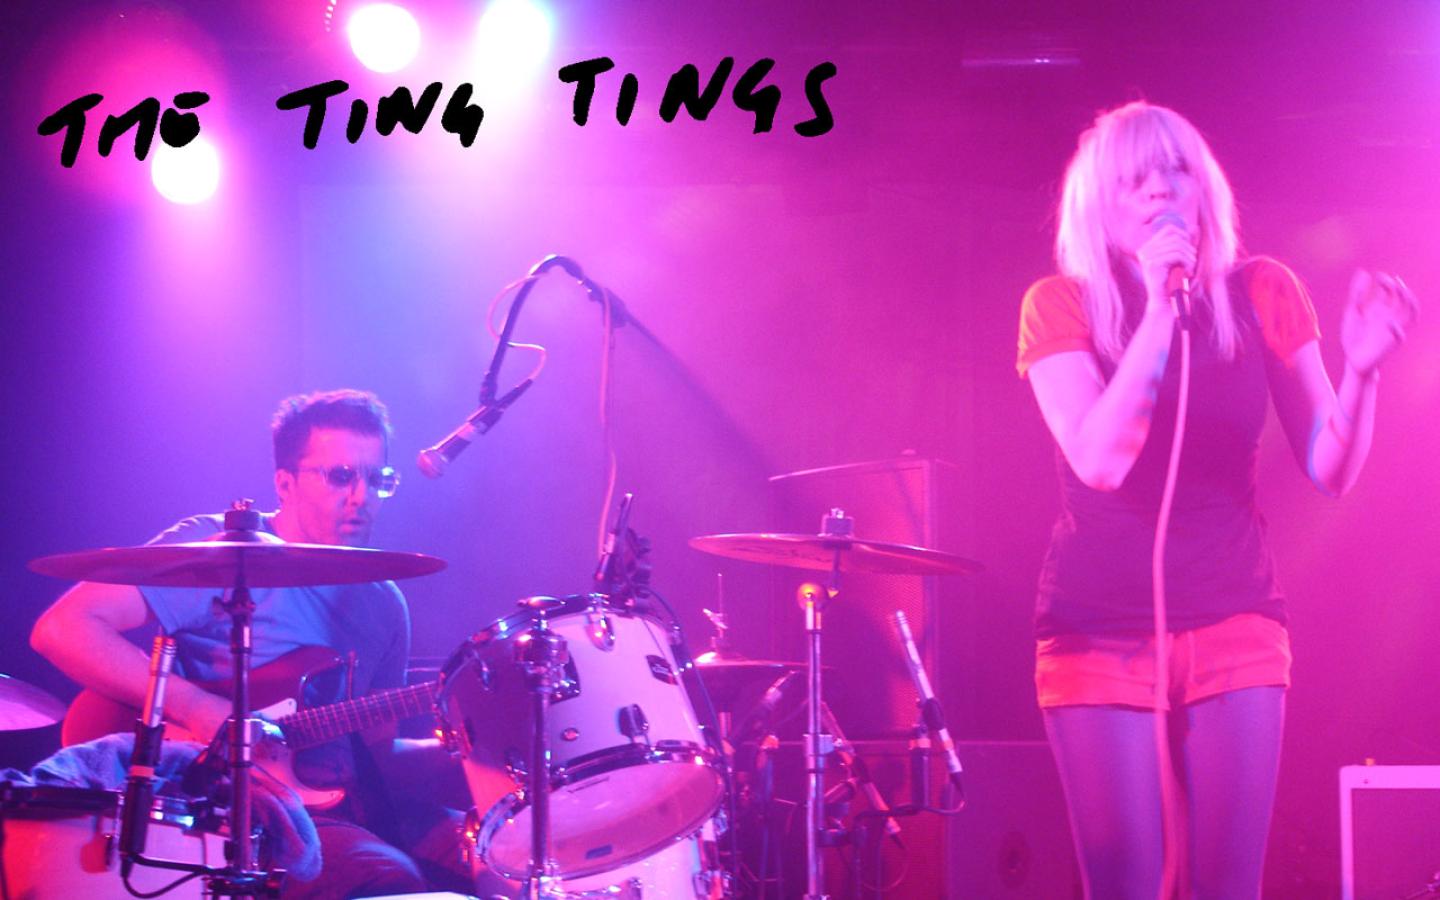 The Ting Tings Wallpaper #3 1440 x 900 